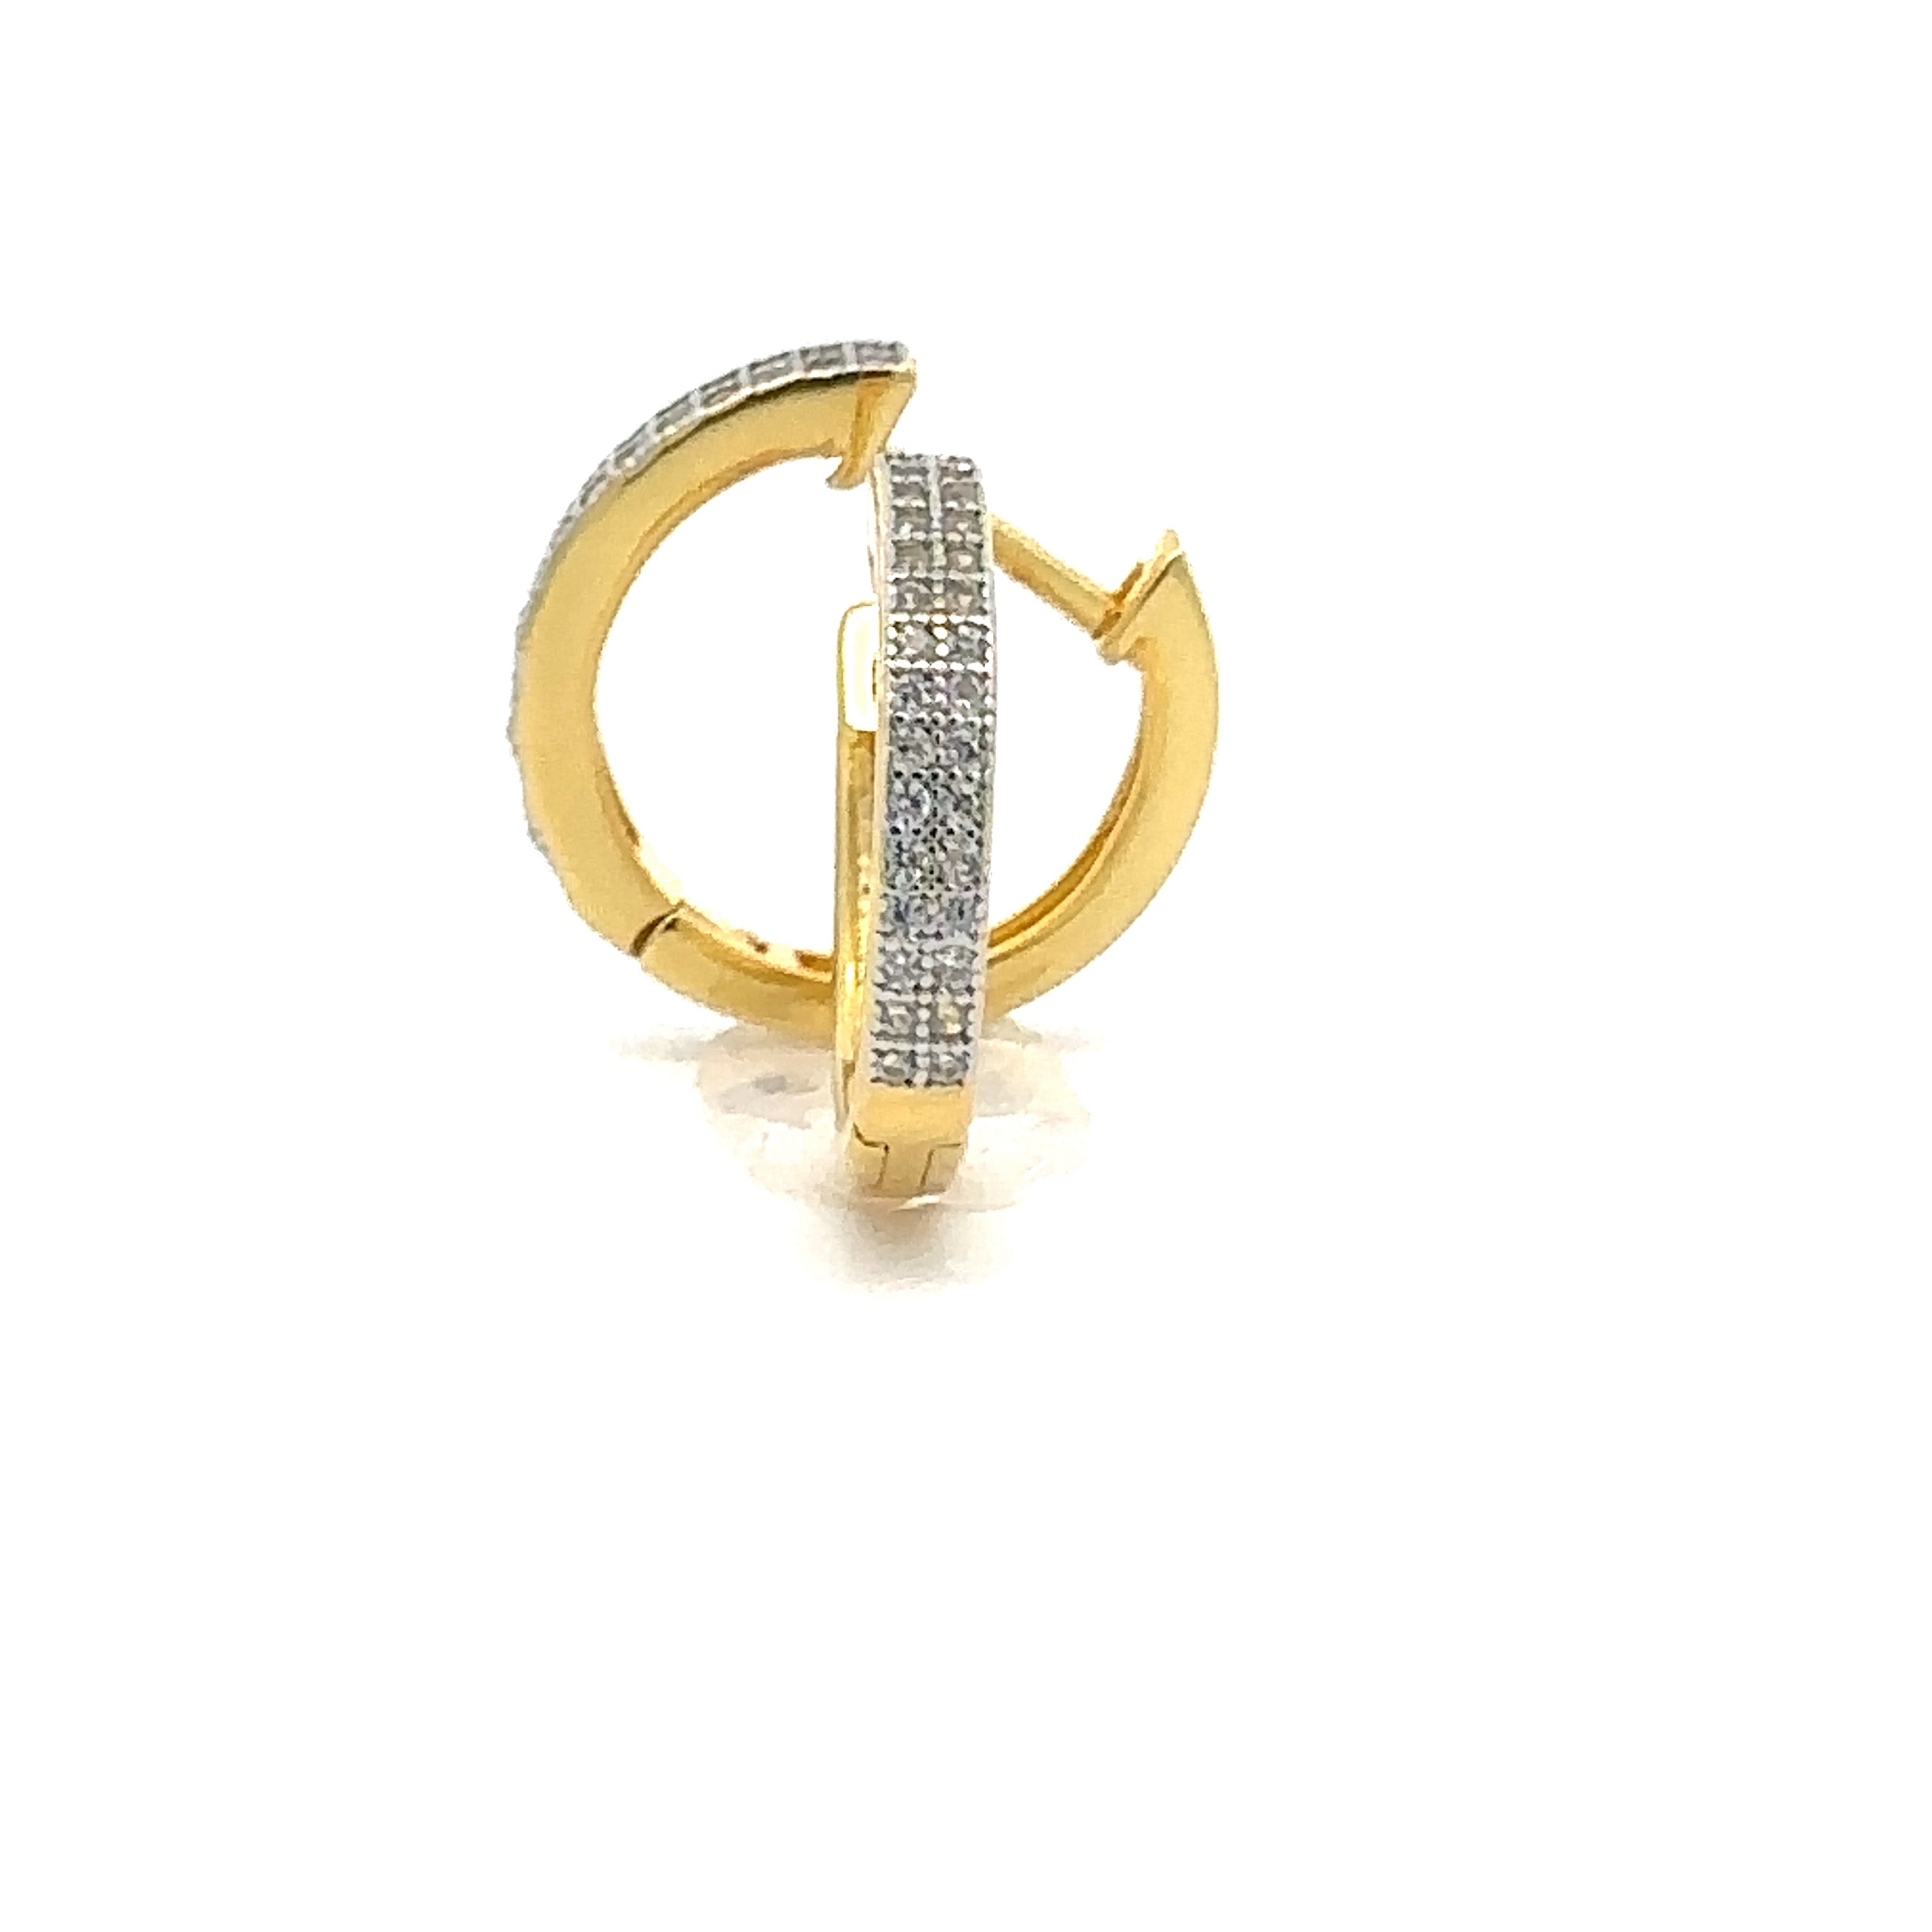 LYREA 925 CZ GOLD ICED OUT EARRINGS | 9220092